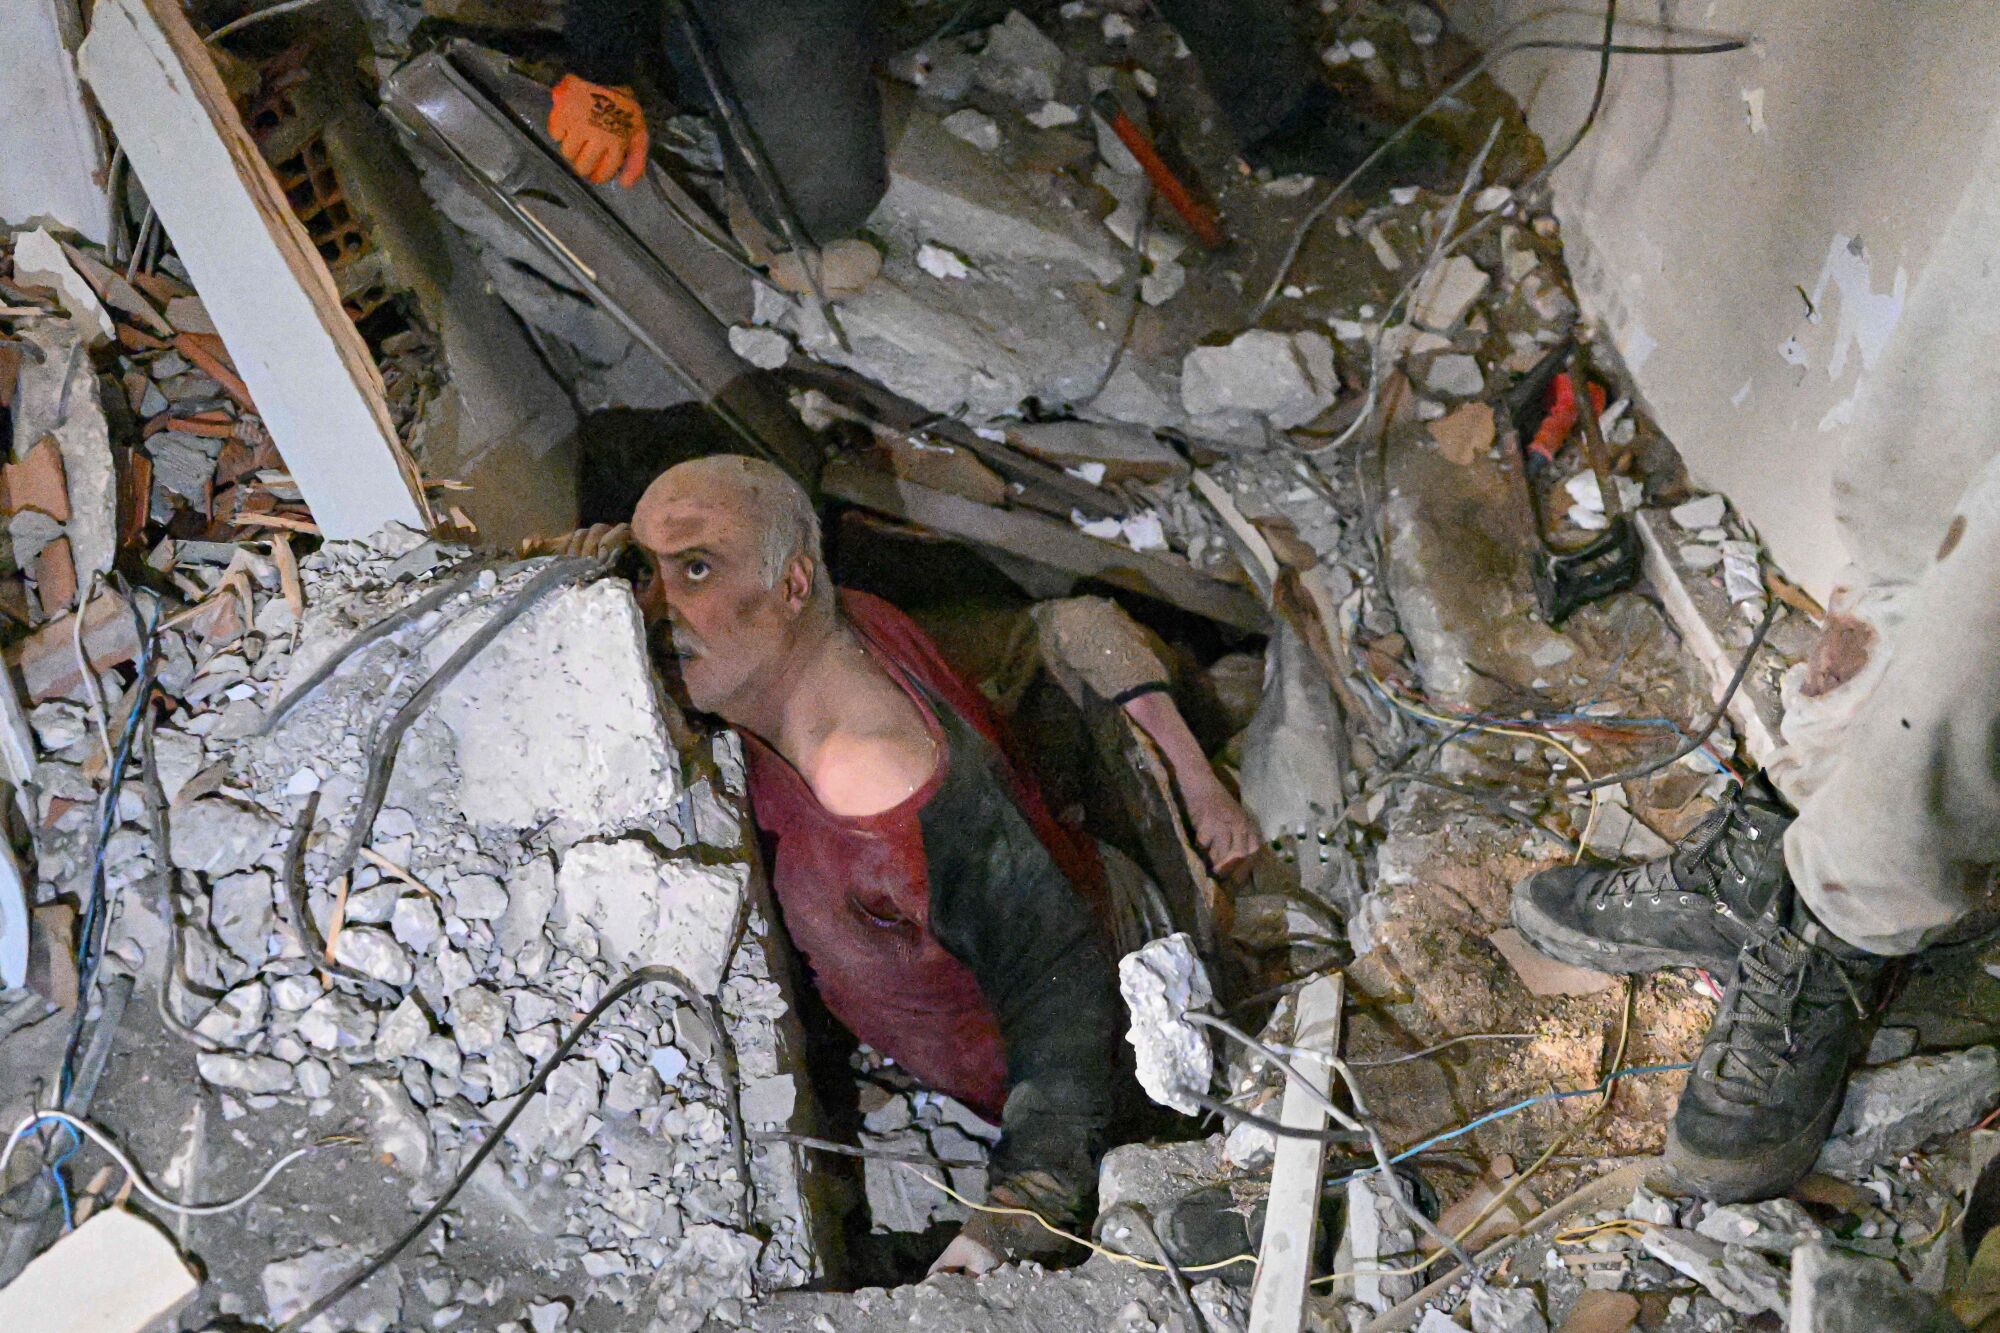 A man watches his rescuers remove debris from the destroyed building where he was trapped in Hatay, Turkey